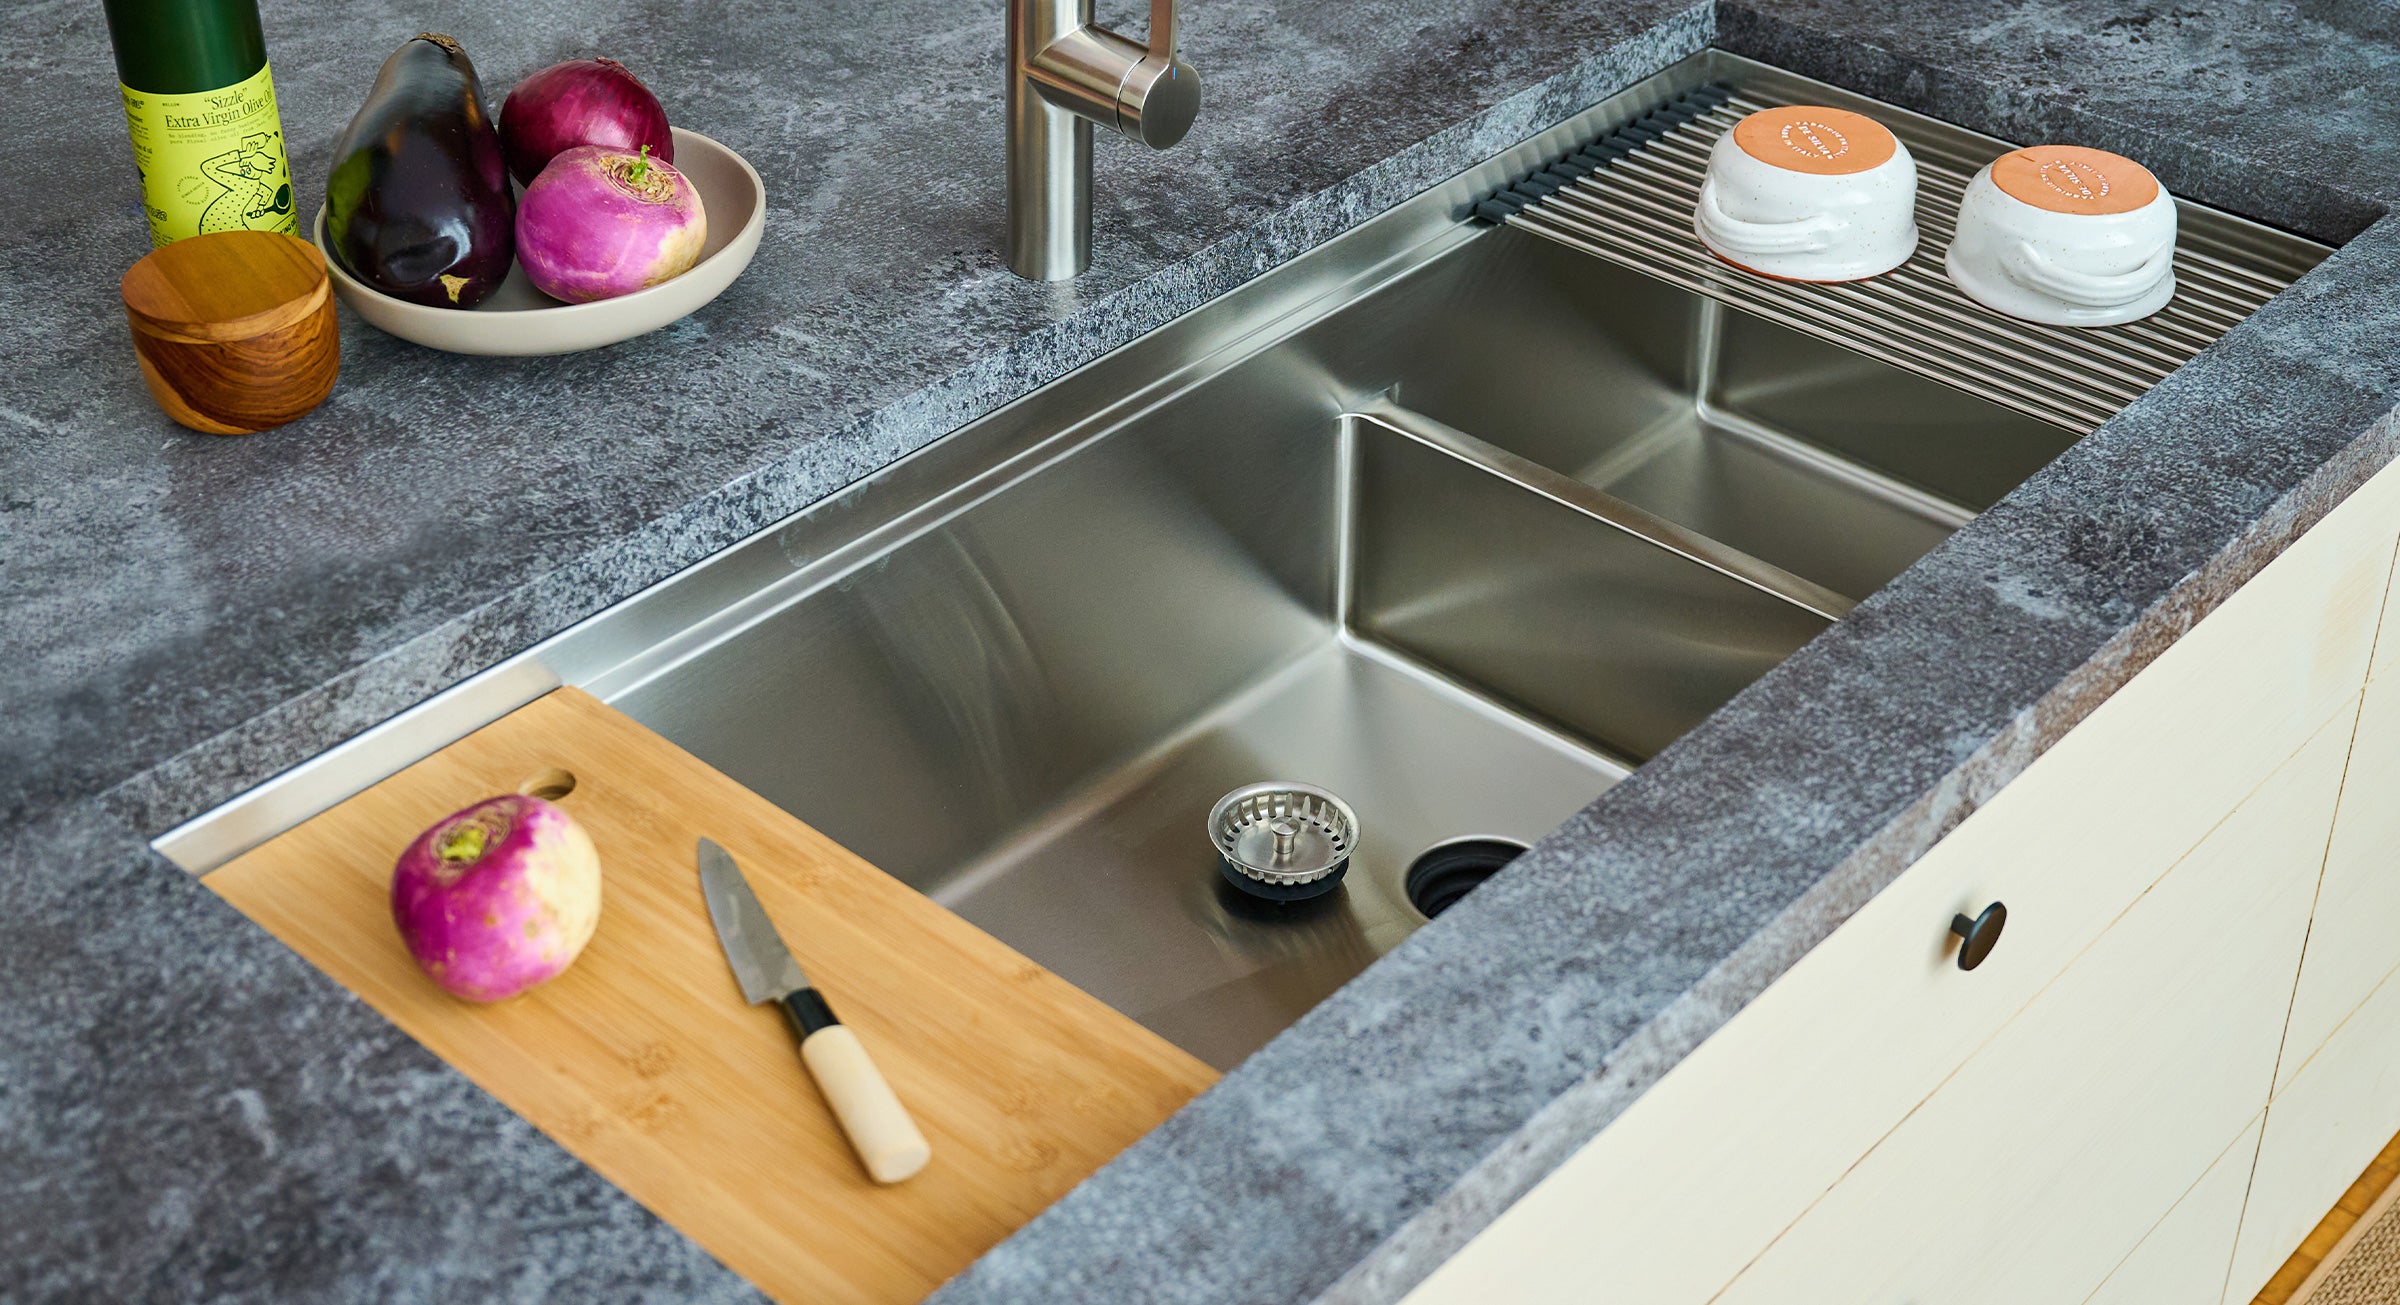 Create Good Sinks 50 inch stainless steel undermount double bowl workstation sink with undermount drain and workstation sink accessories for cutting vegetables and drying dishes over the sink. Shown with matching stainless steel faucet.